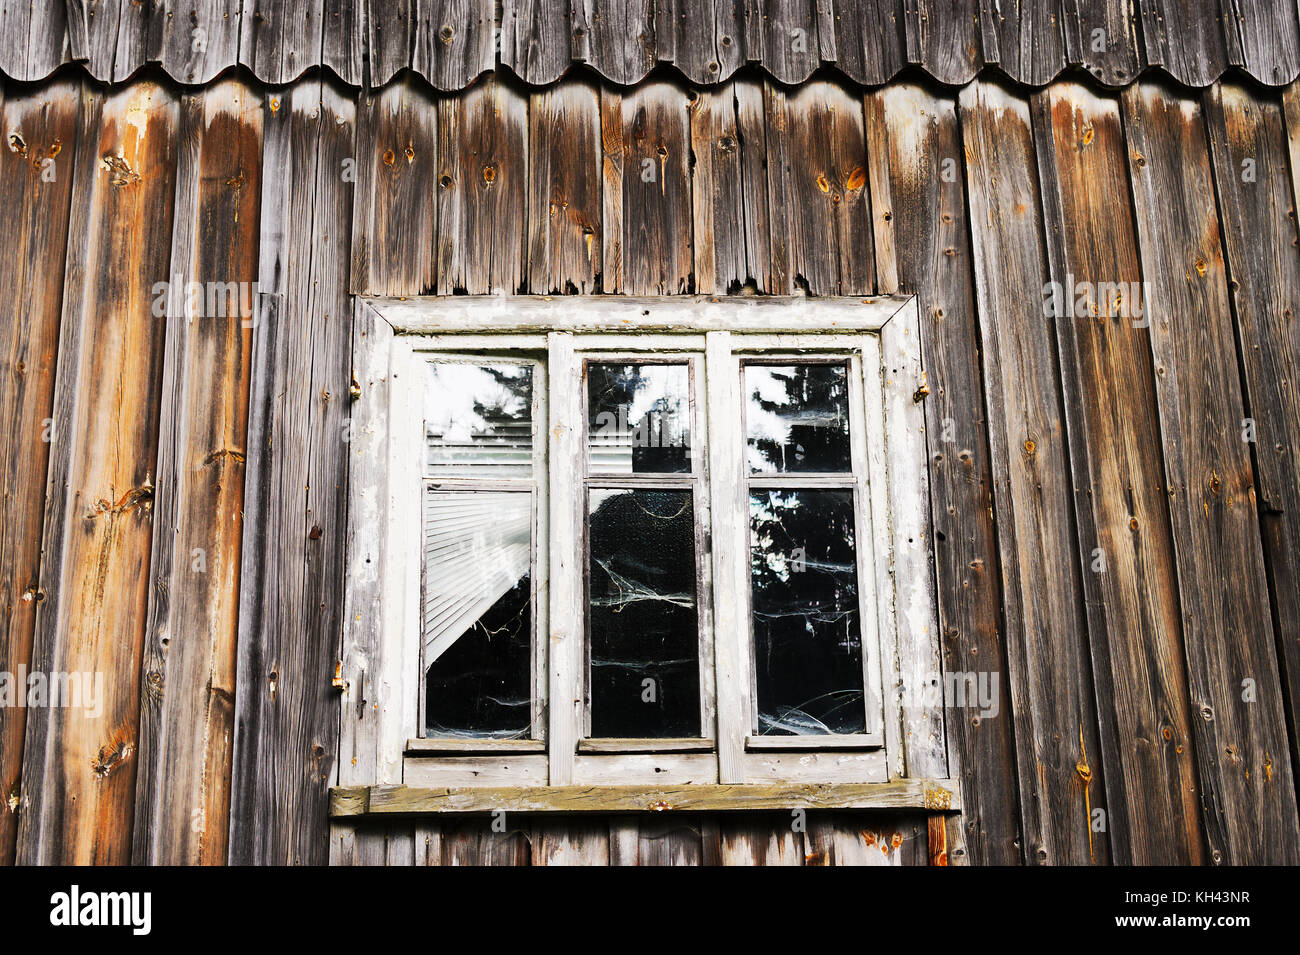 Window and wall of the old abandoned wooden house. Details of vintage wall and window frames. Sudetes, Poland. Stock Photo